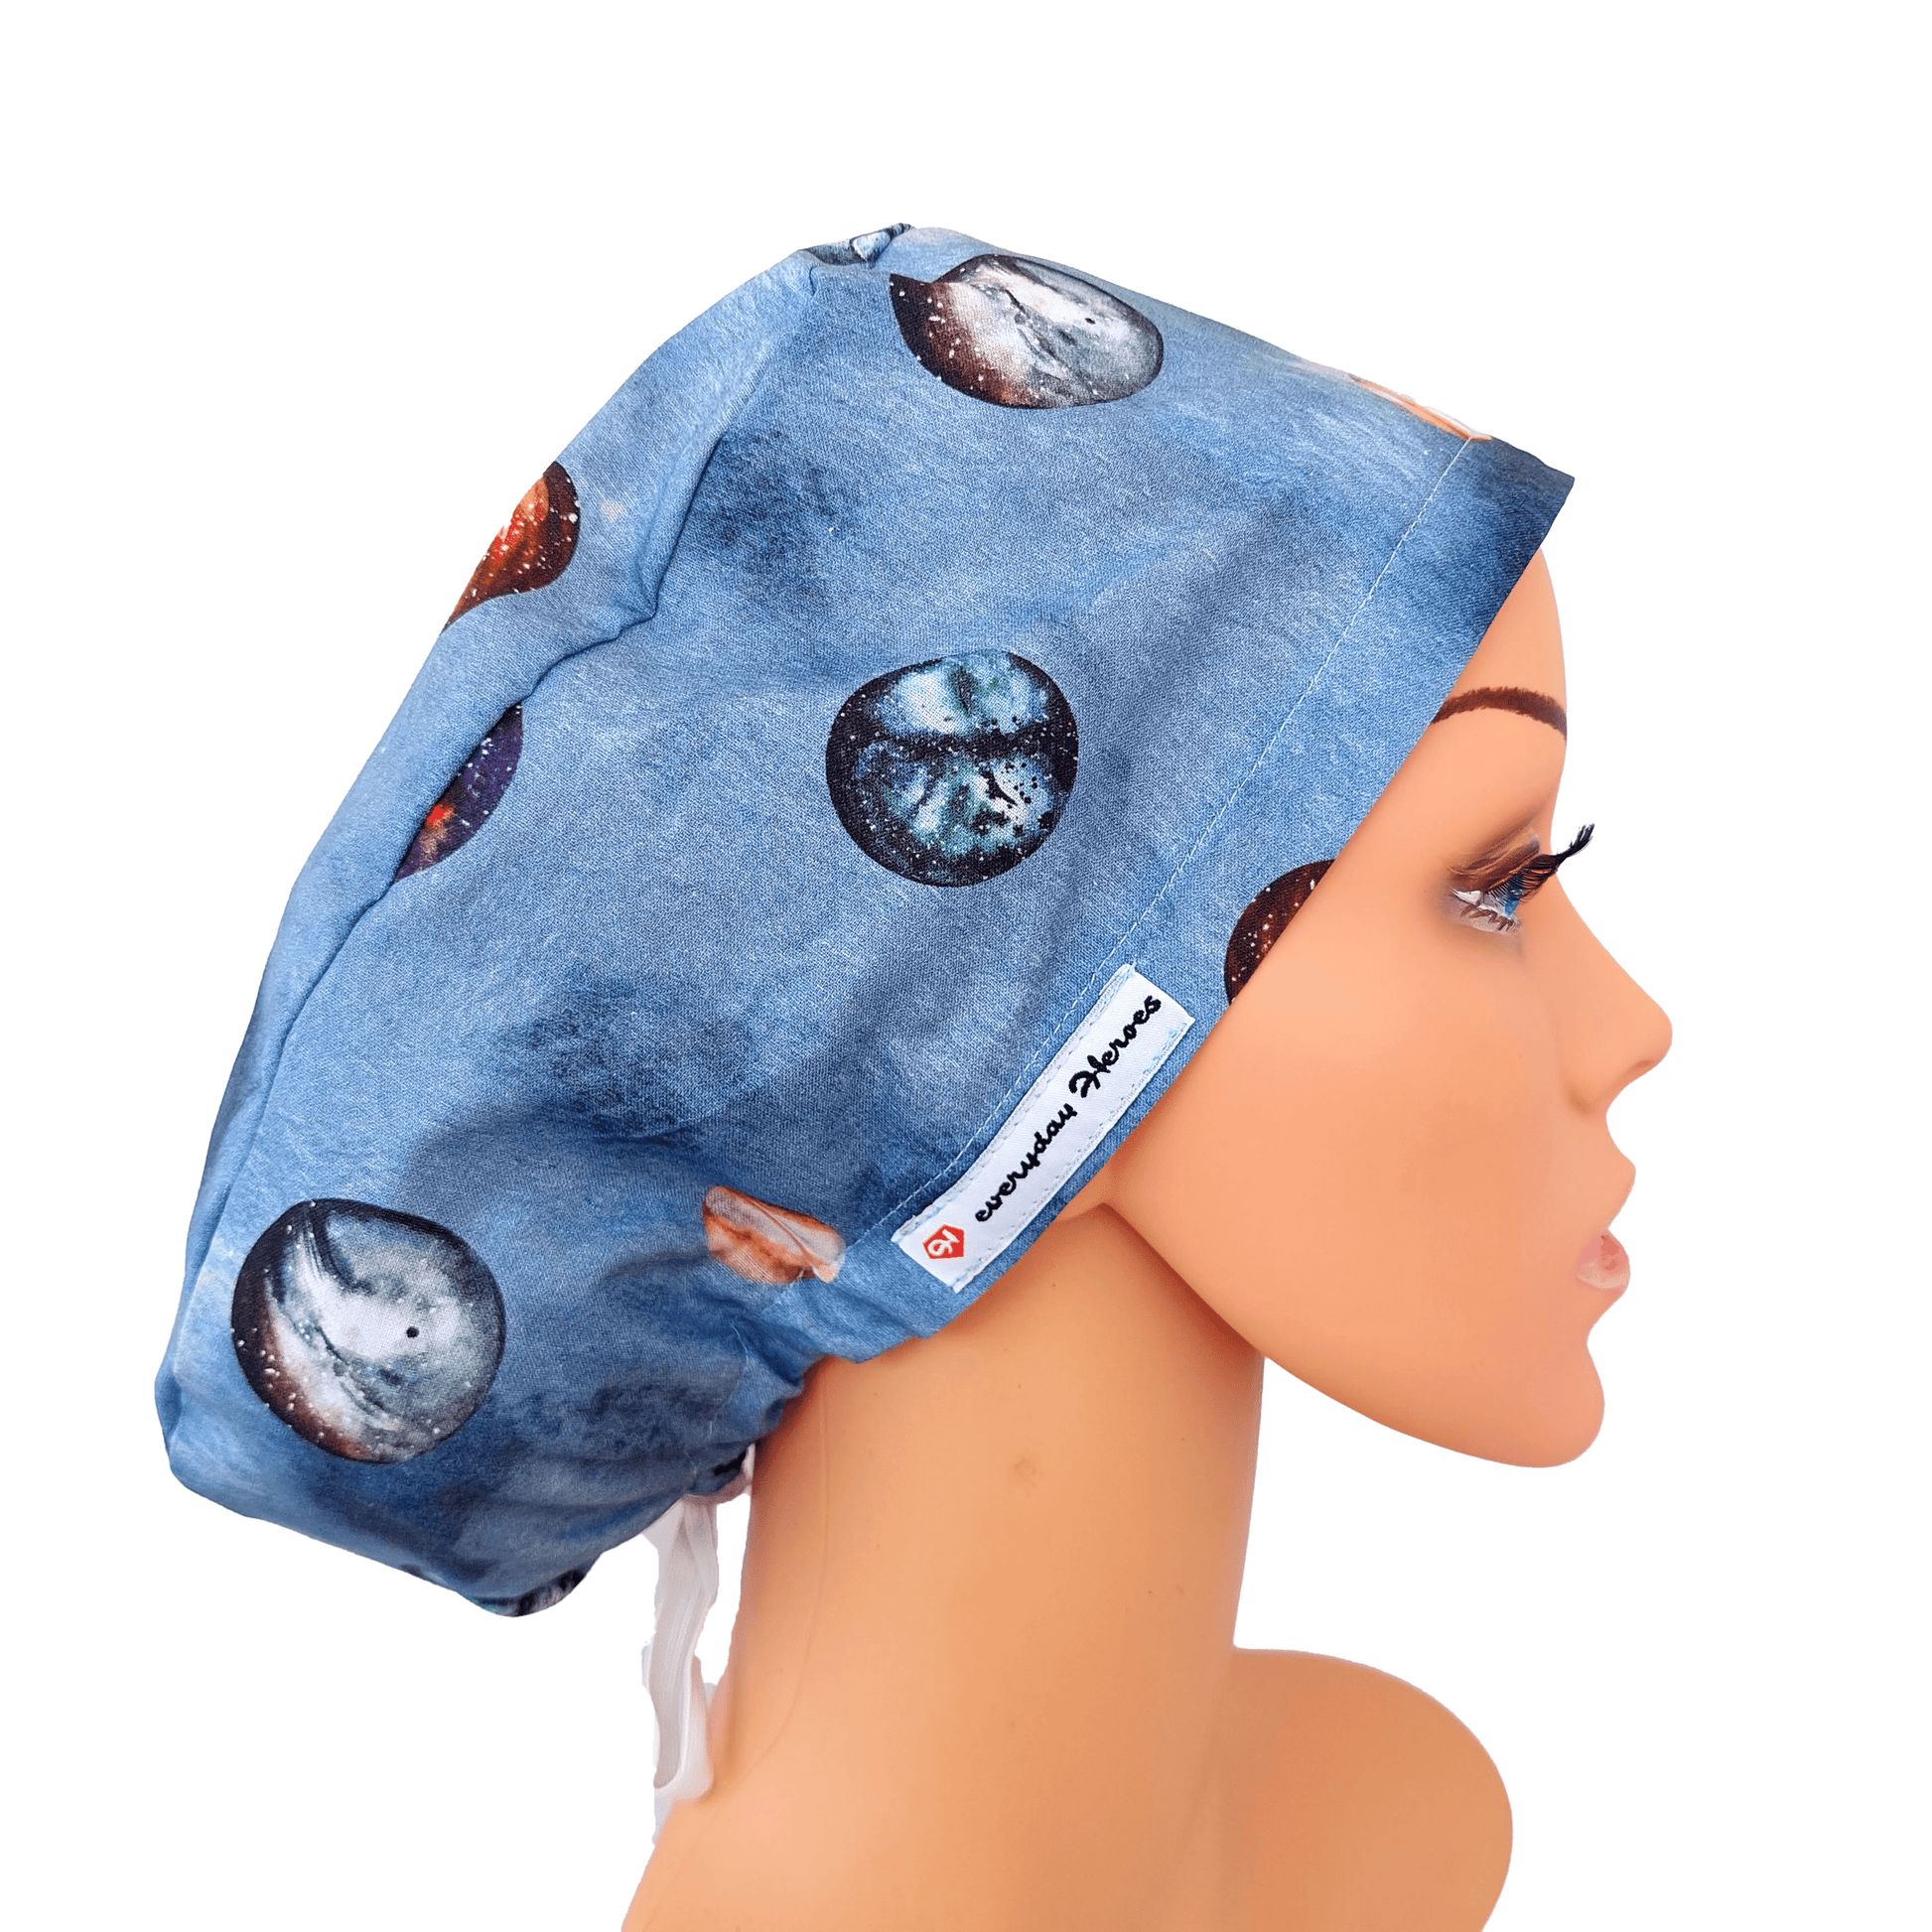 Our euro scrub cap is designed to fit snugly around your head, with a slight slouch in the back for those with medium to long hair. Made of 100% cotton fabric with small colorful planets print-Venus ,Moon, Mars, Jupiter, Mercury.-